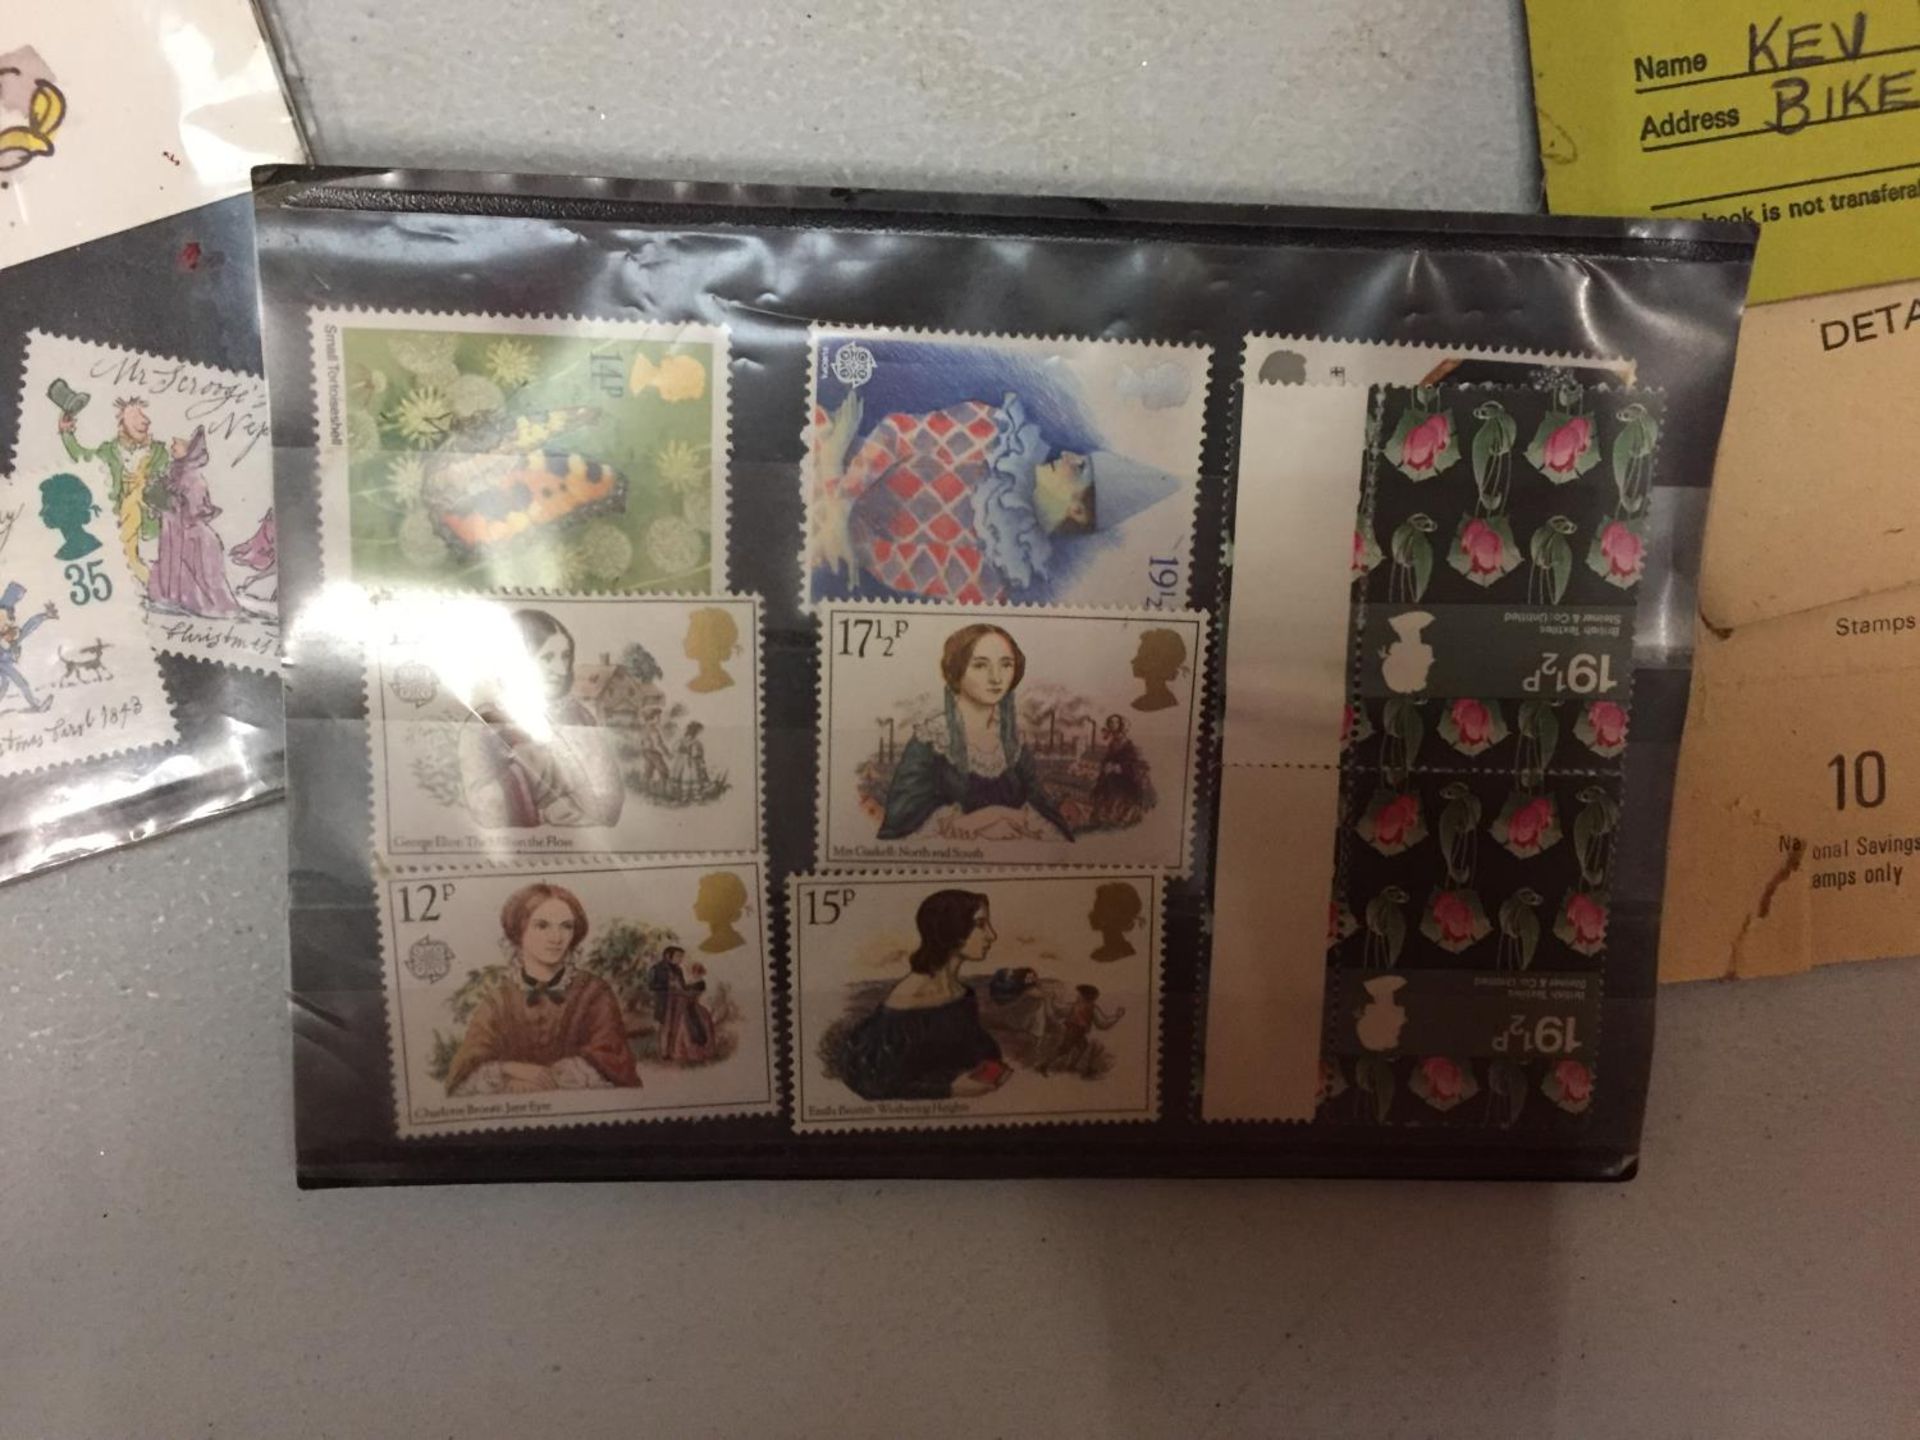 VARIOUS UN-CIRCULATED STAMPS, THREE RATION BOOKS ETC - Image 2 of 5